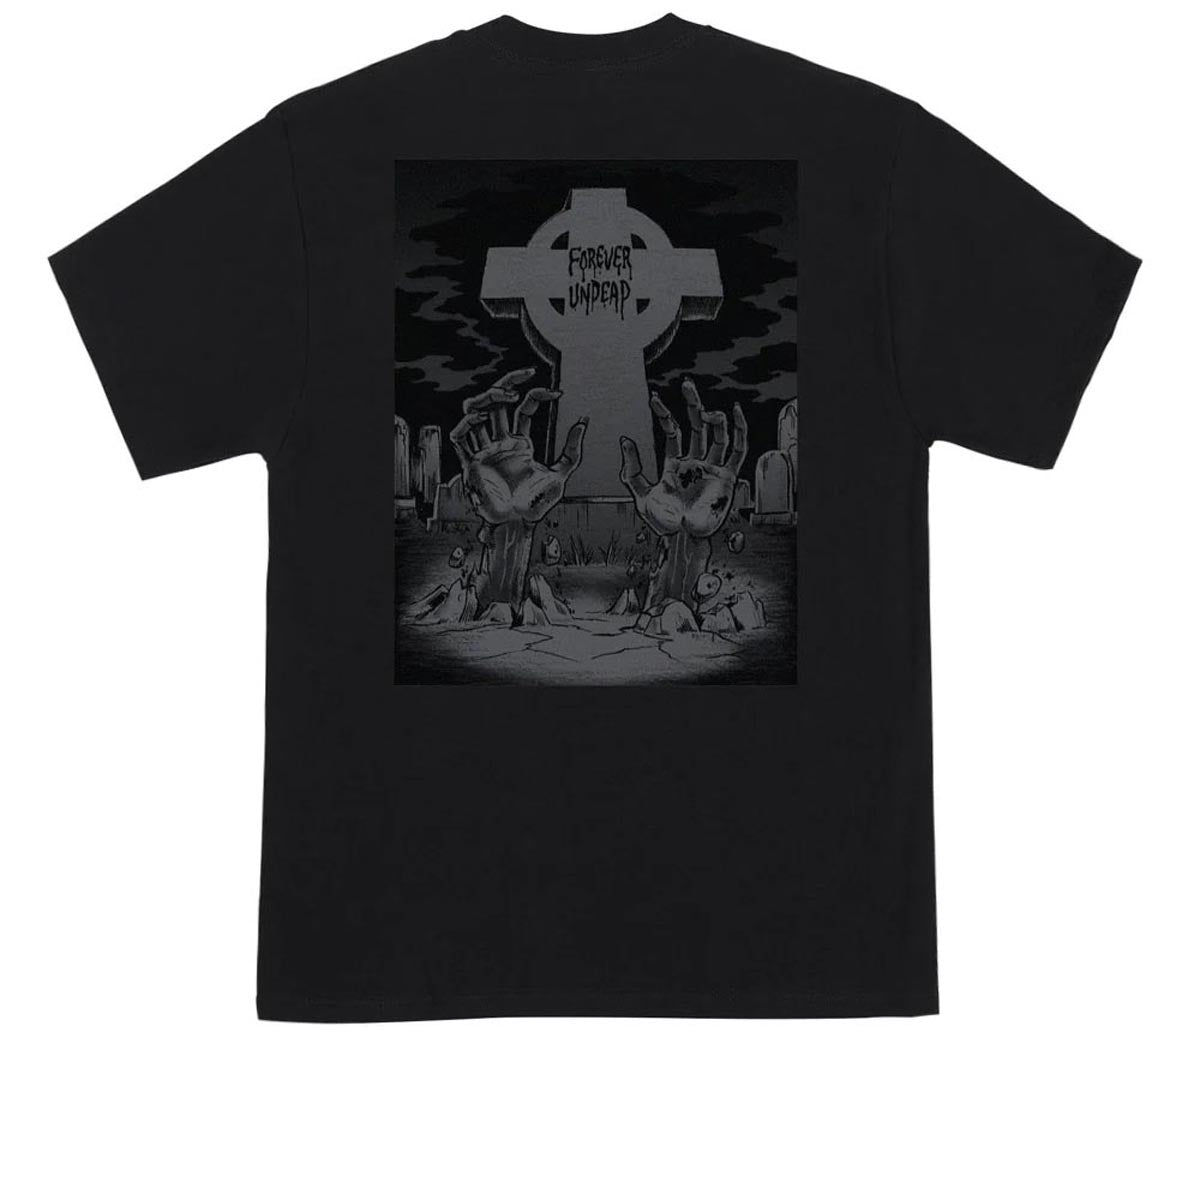 Creature Forever Undead Relic T-Shirt - Black image 1